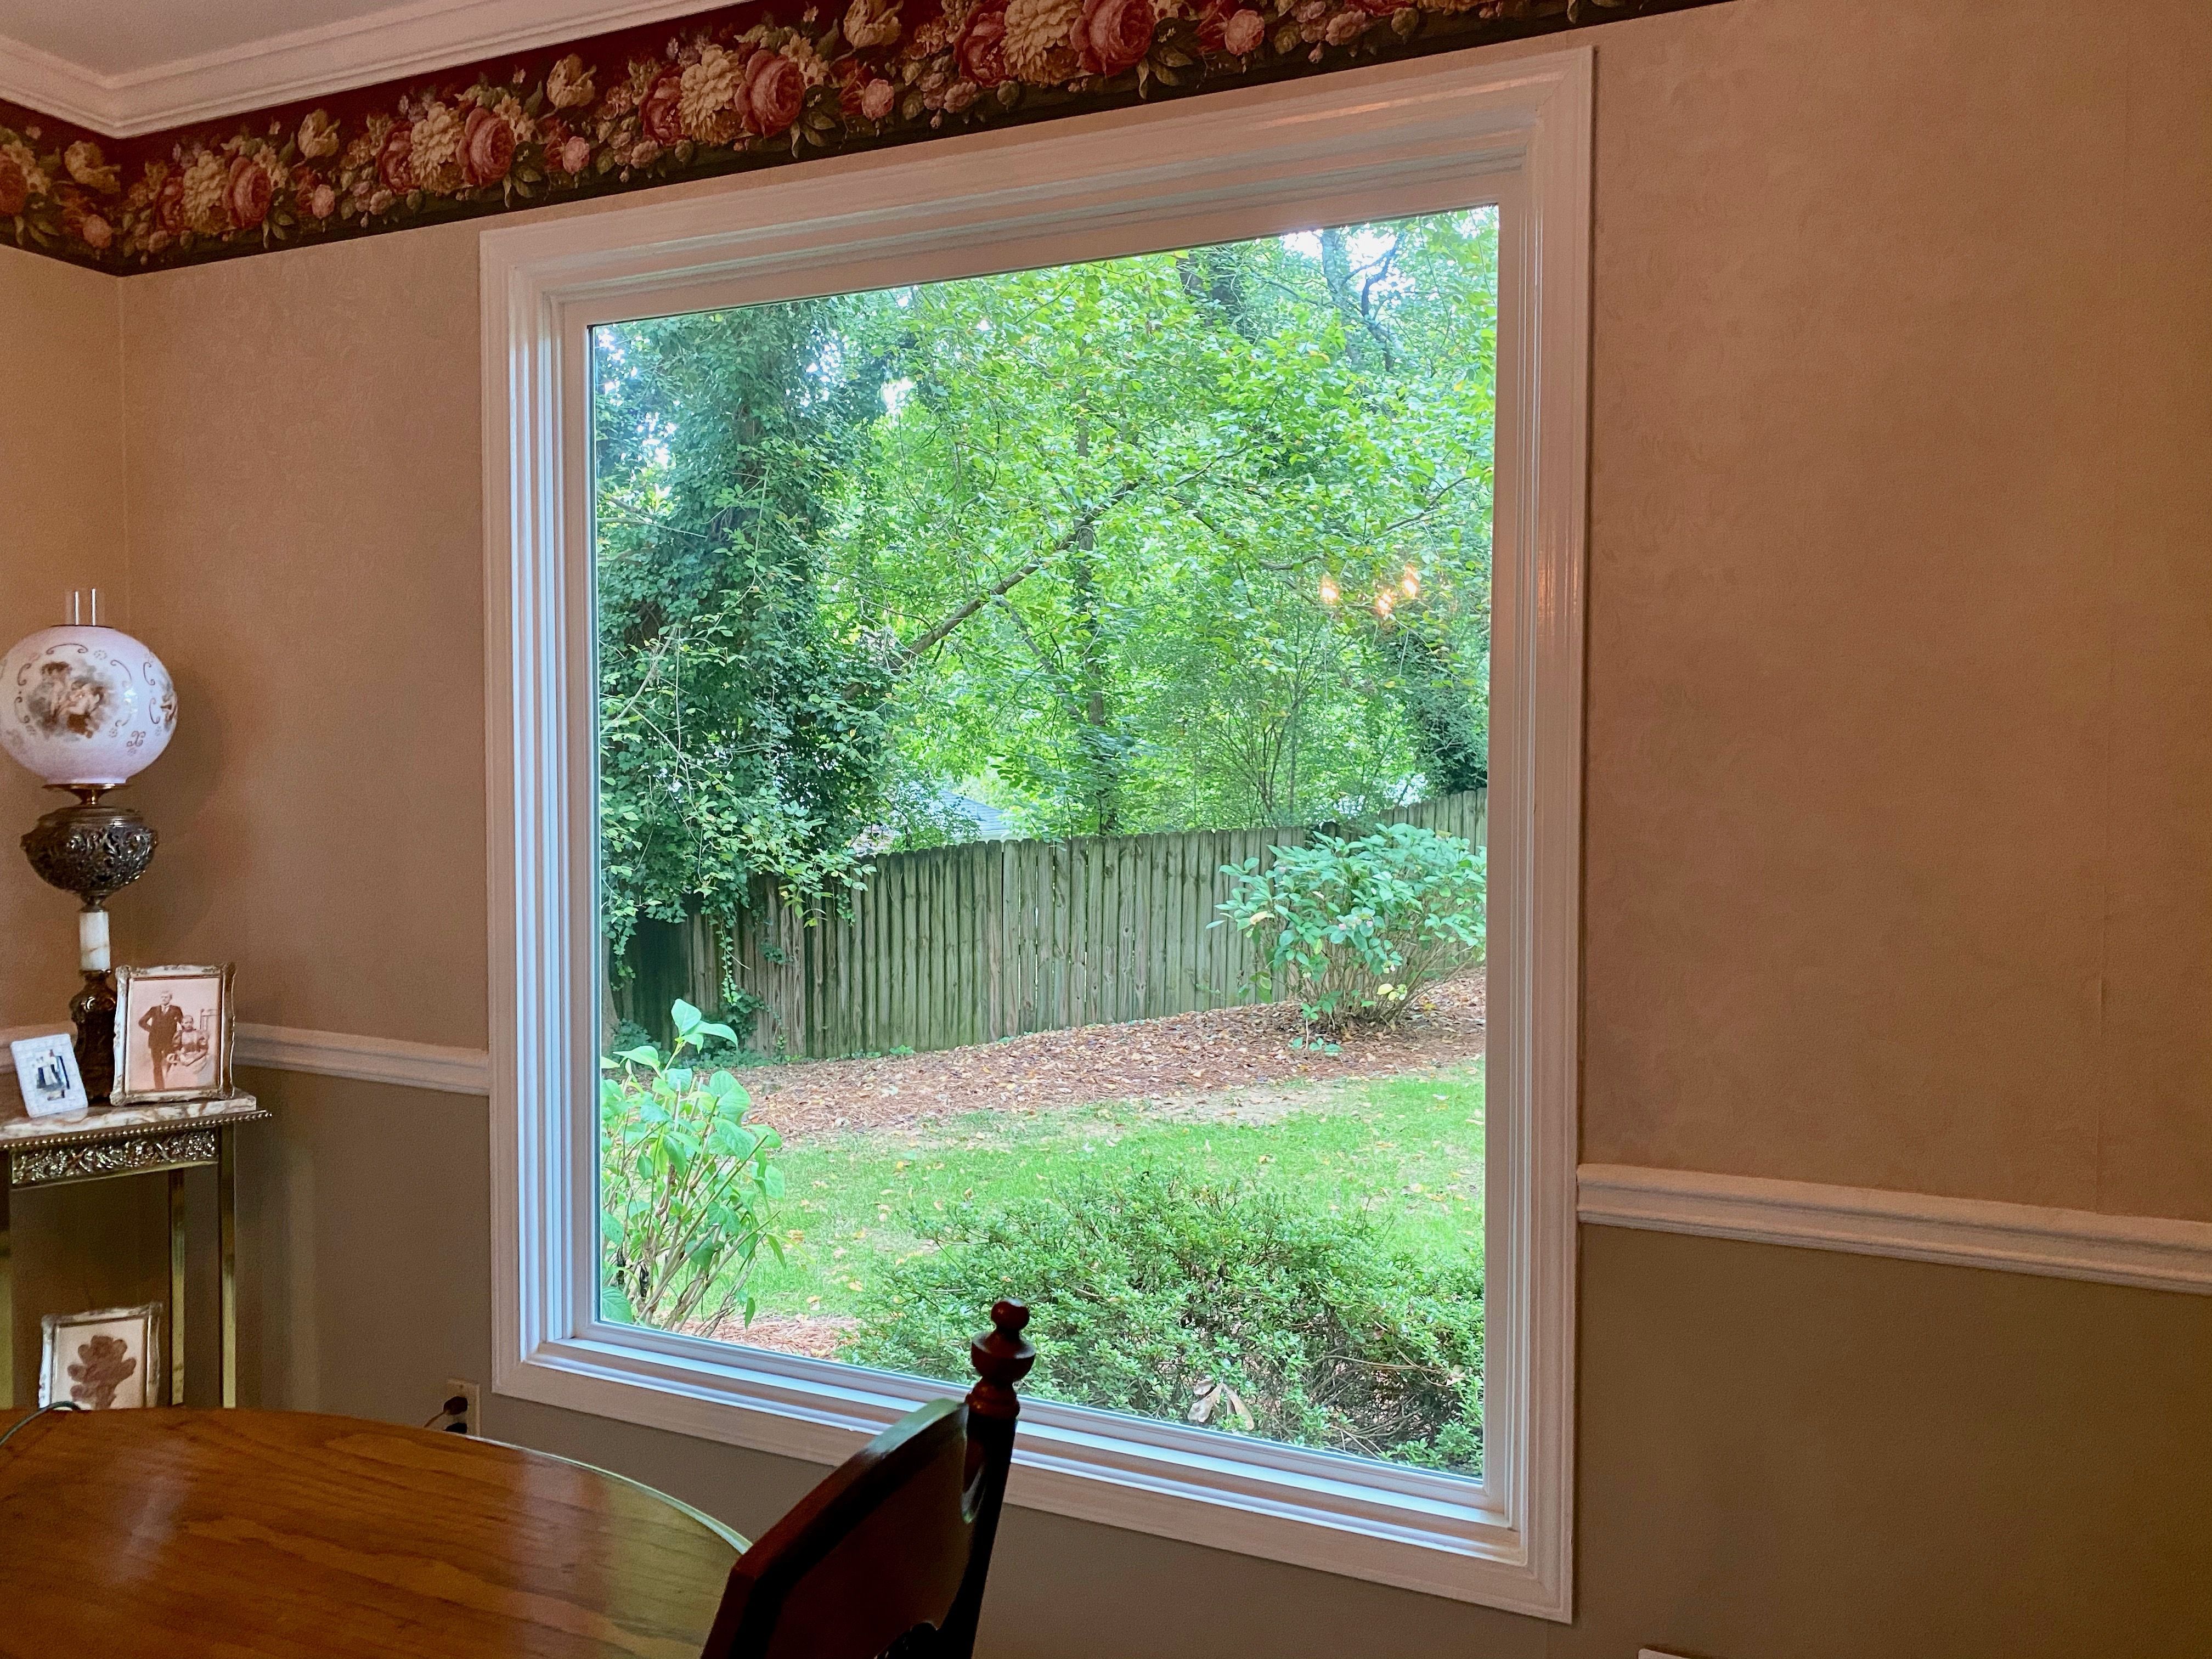 Fiberglass is a stronger material, allowing for thinner frames and more glass to preserve your views.